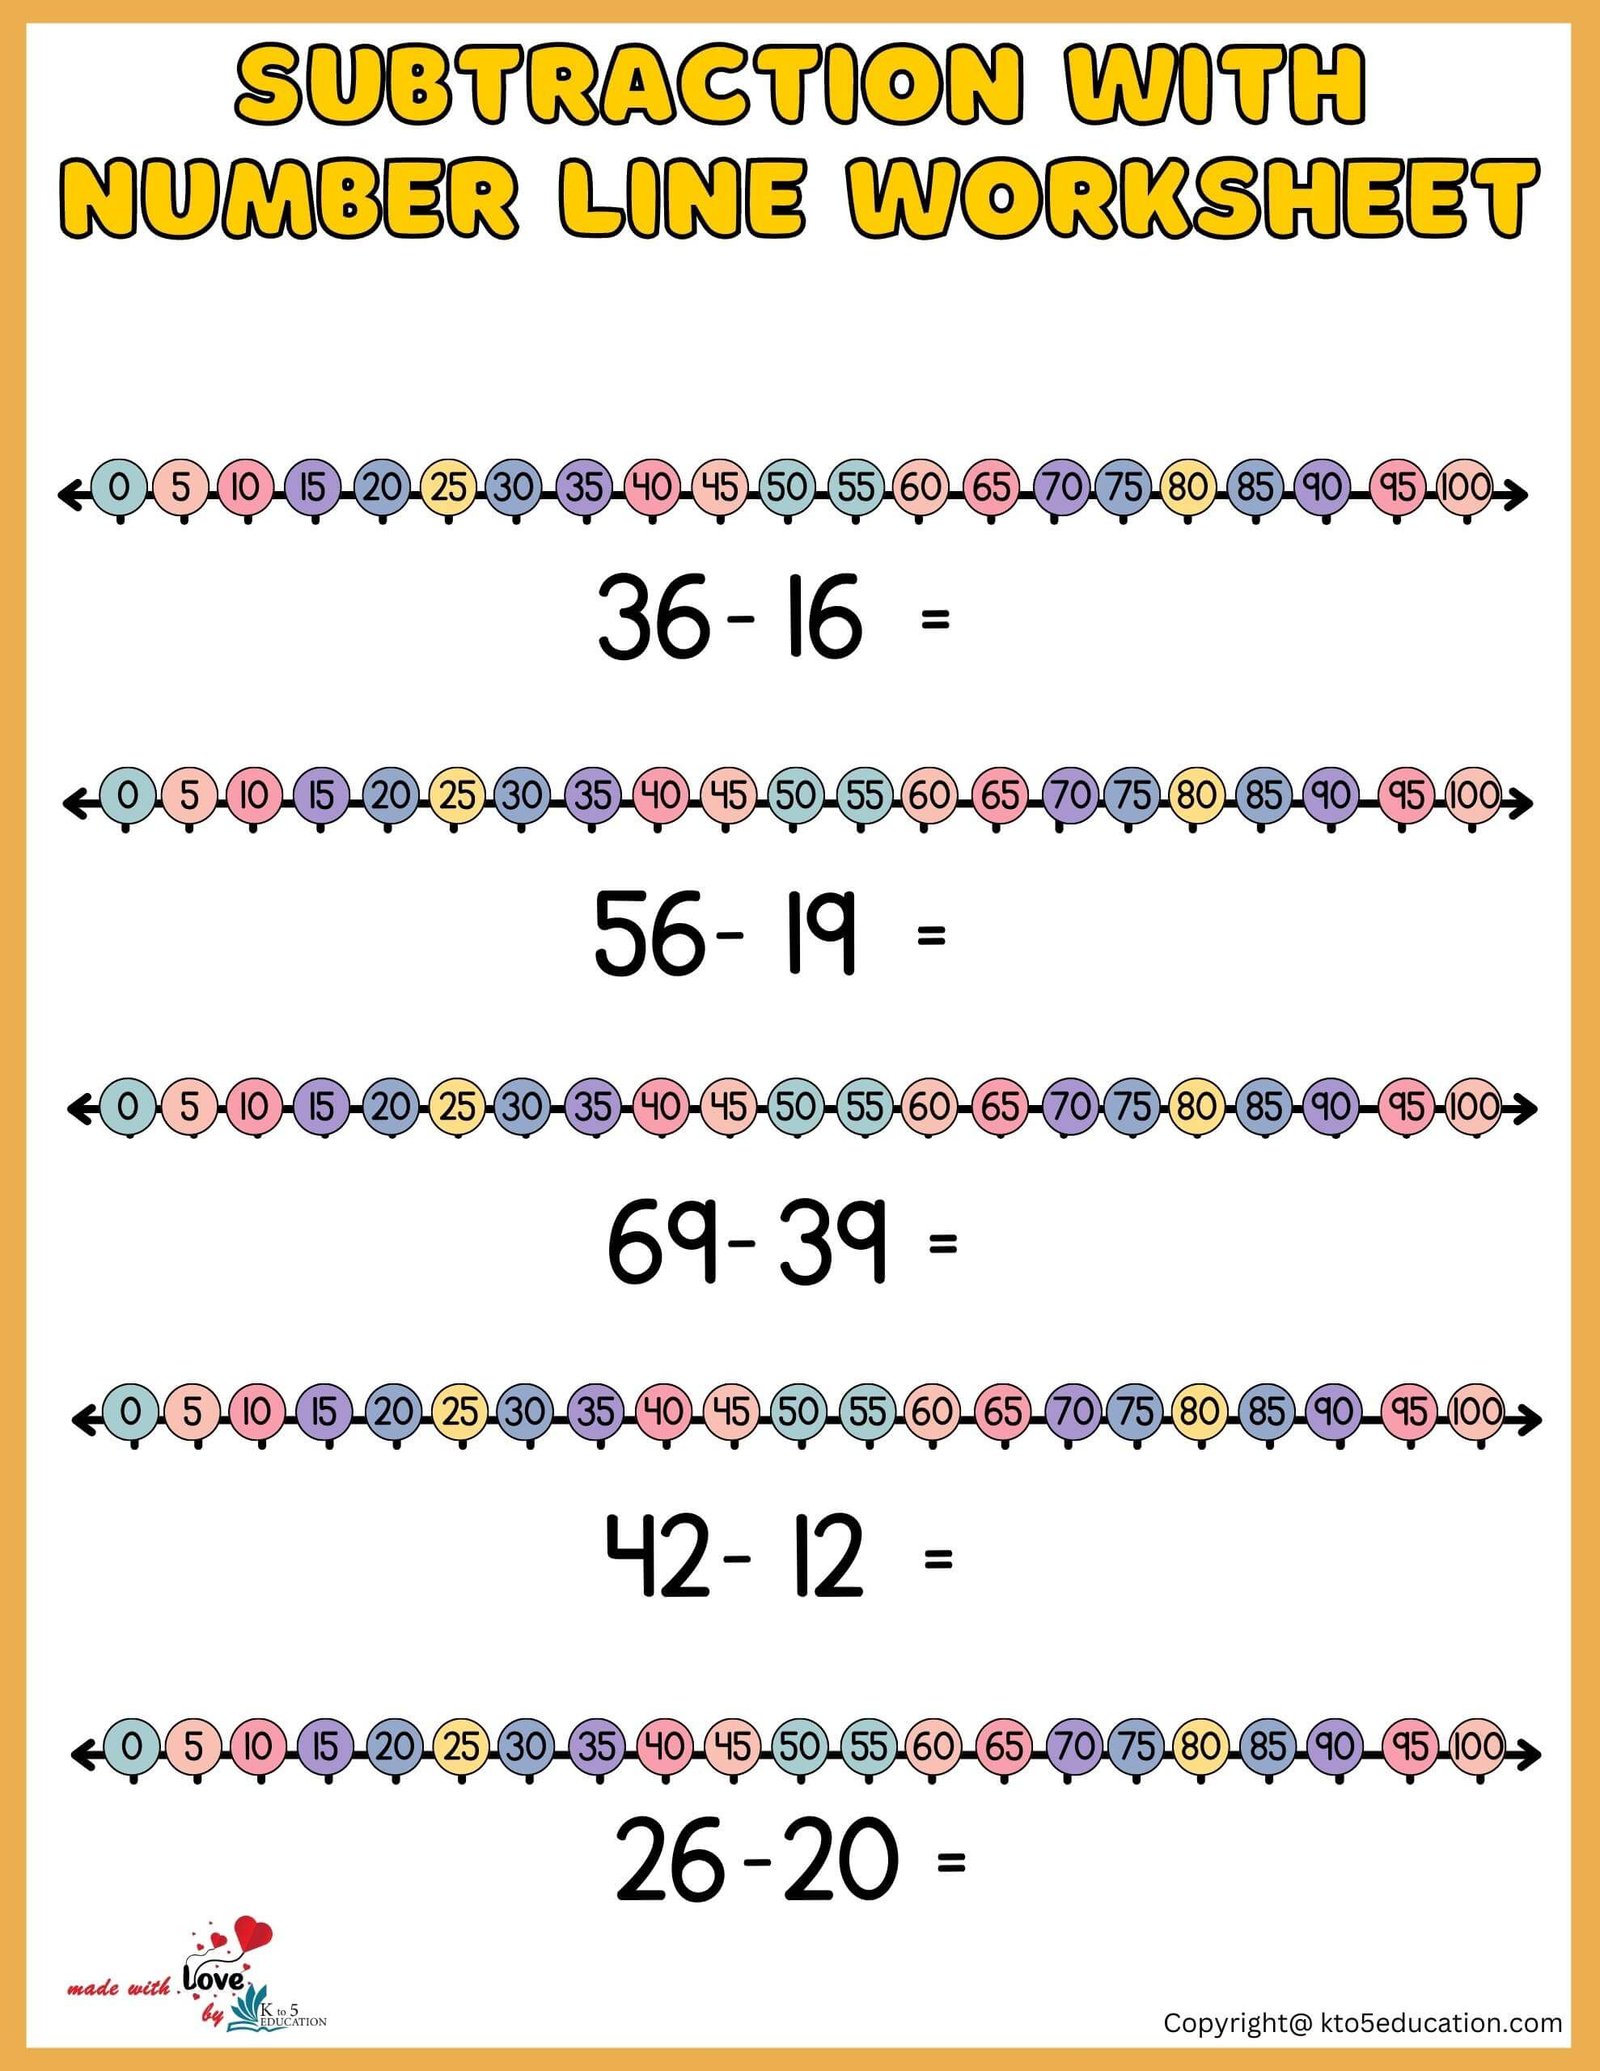 Subtraction With Number Line Worksheets 1-100